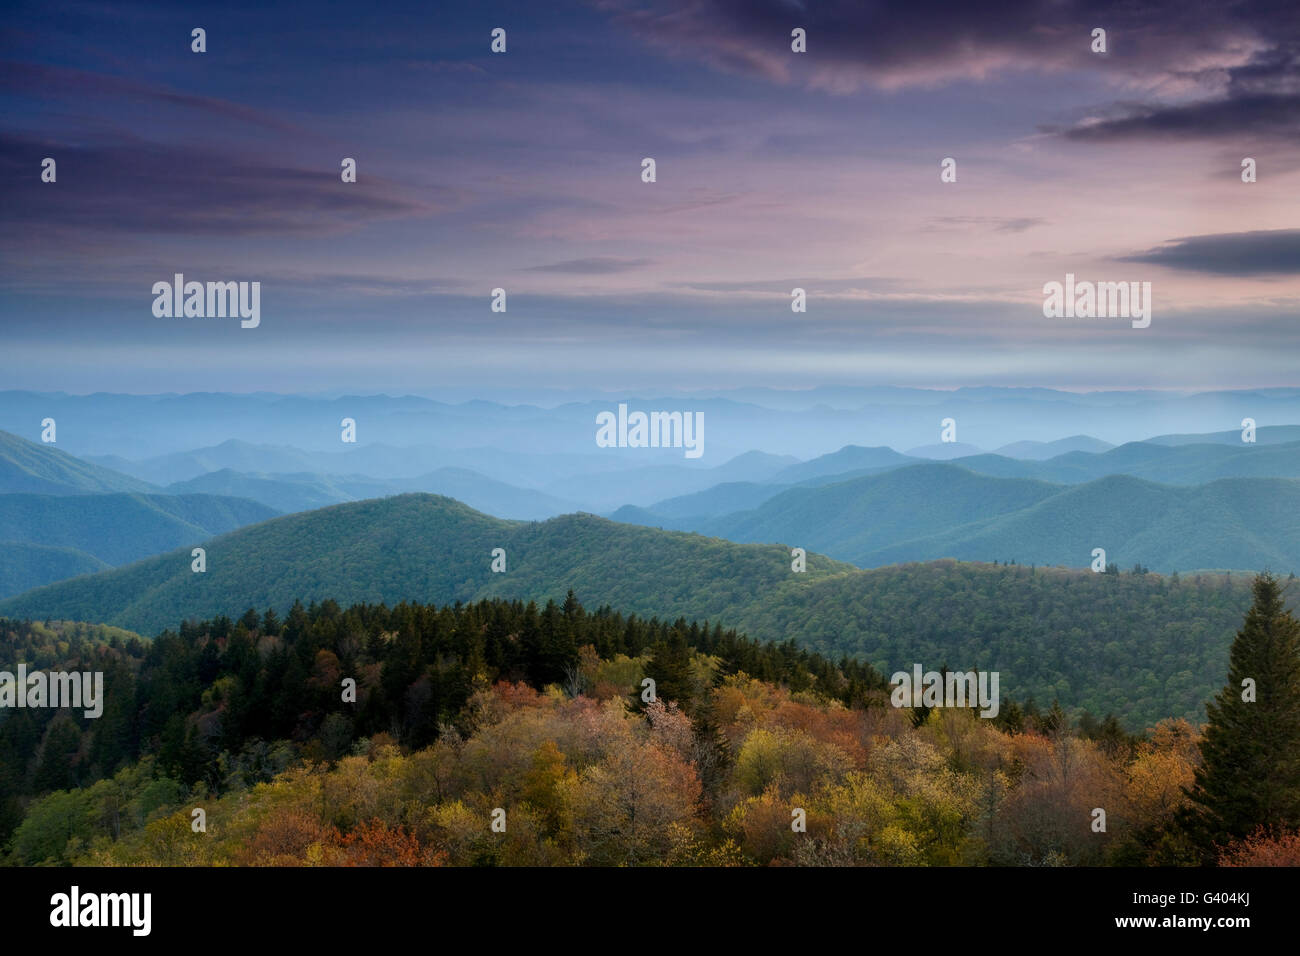 Looking out at a classic Blue Ridge view at dusk from the Cowee Mountain Overlook along the Blue Ridge Parkway Stock Photo